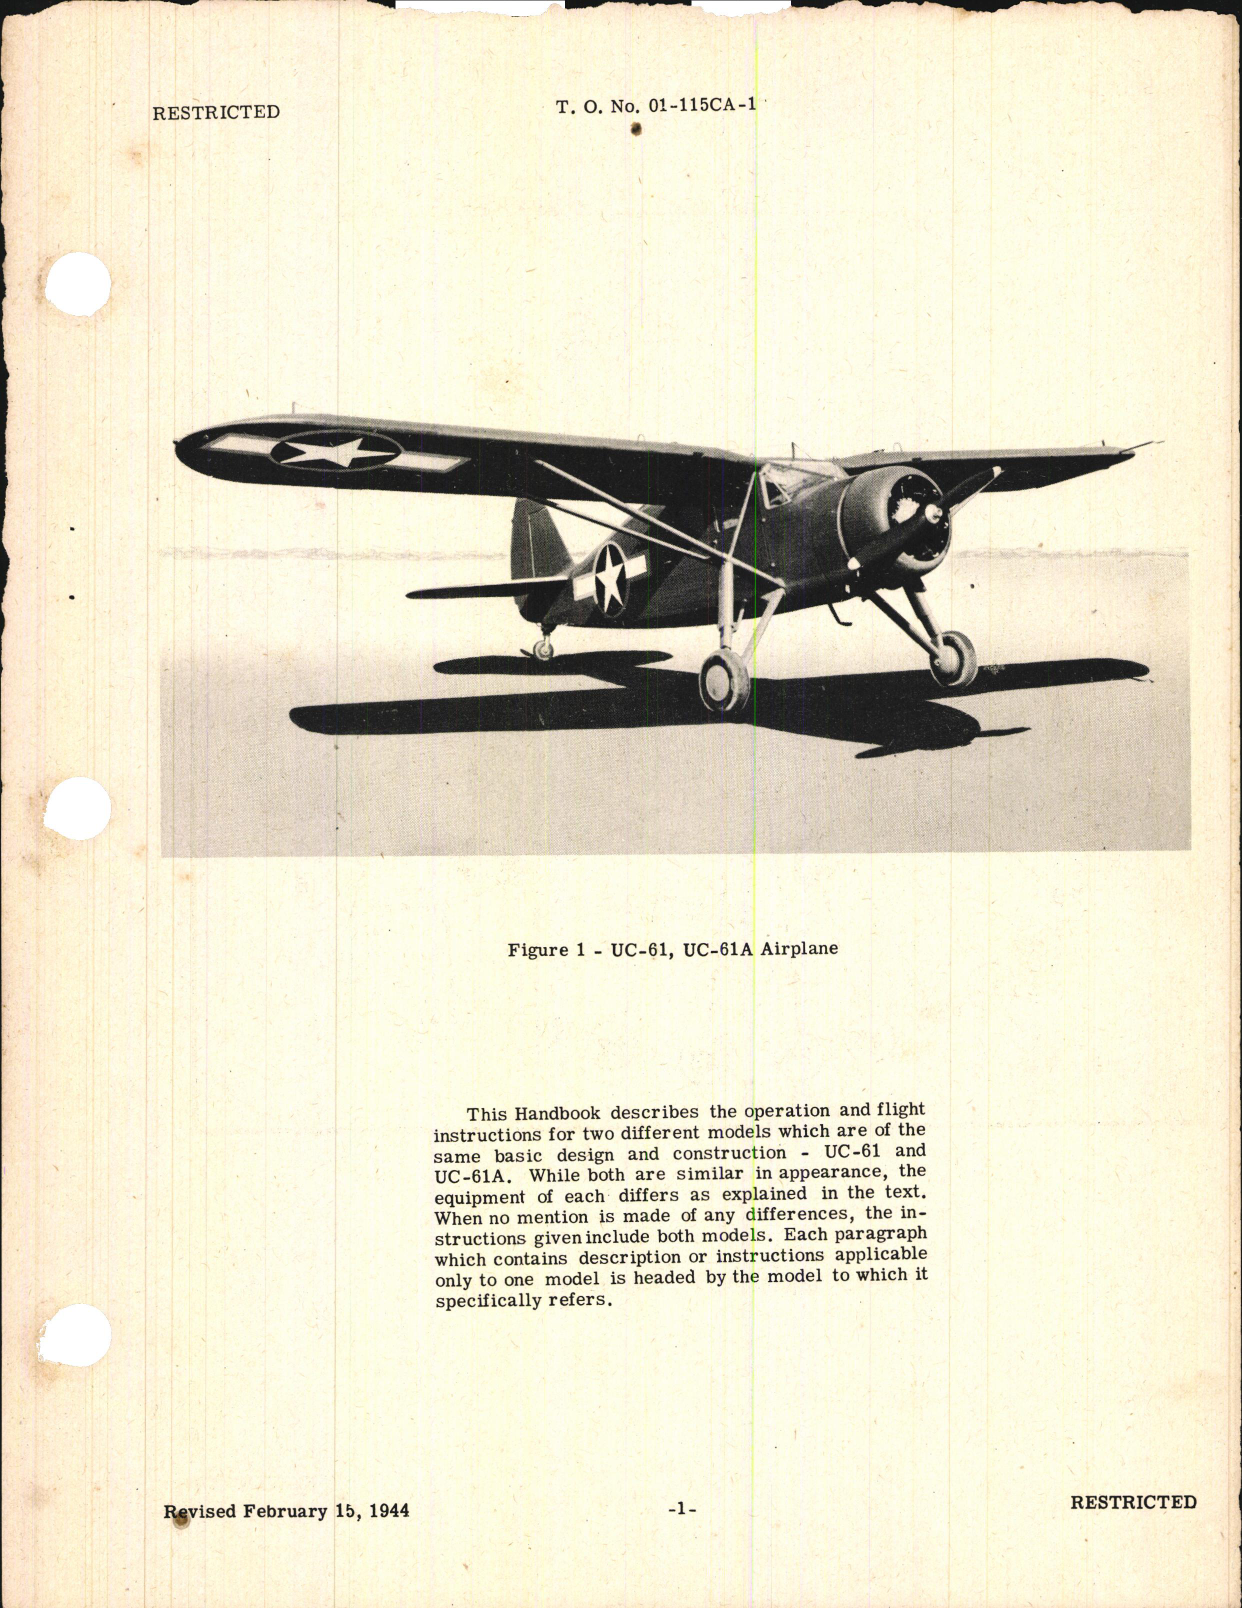 Sample page 5 from AirCorps Library document: Pilot's Flight Operating Instructions for UC-61, UC-61A, GK-1